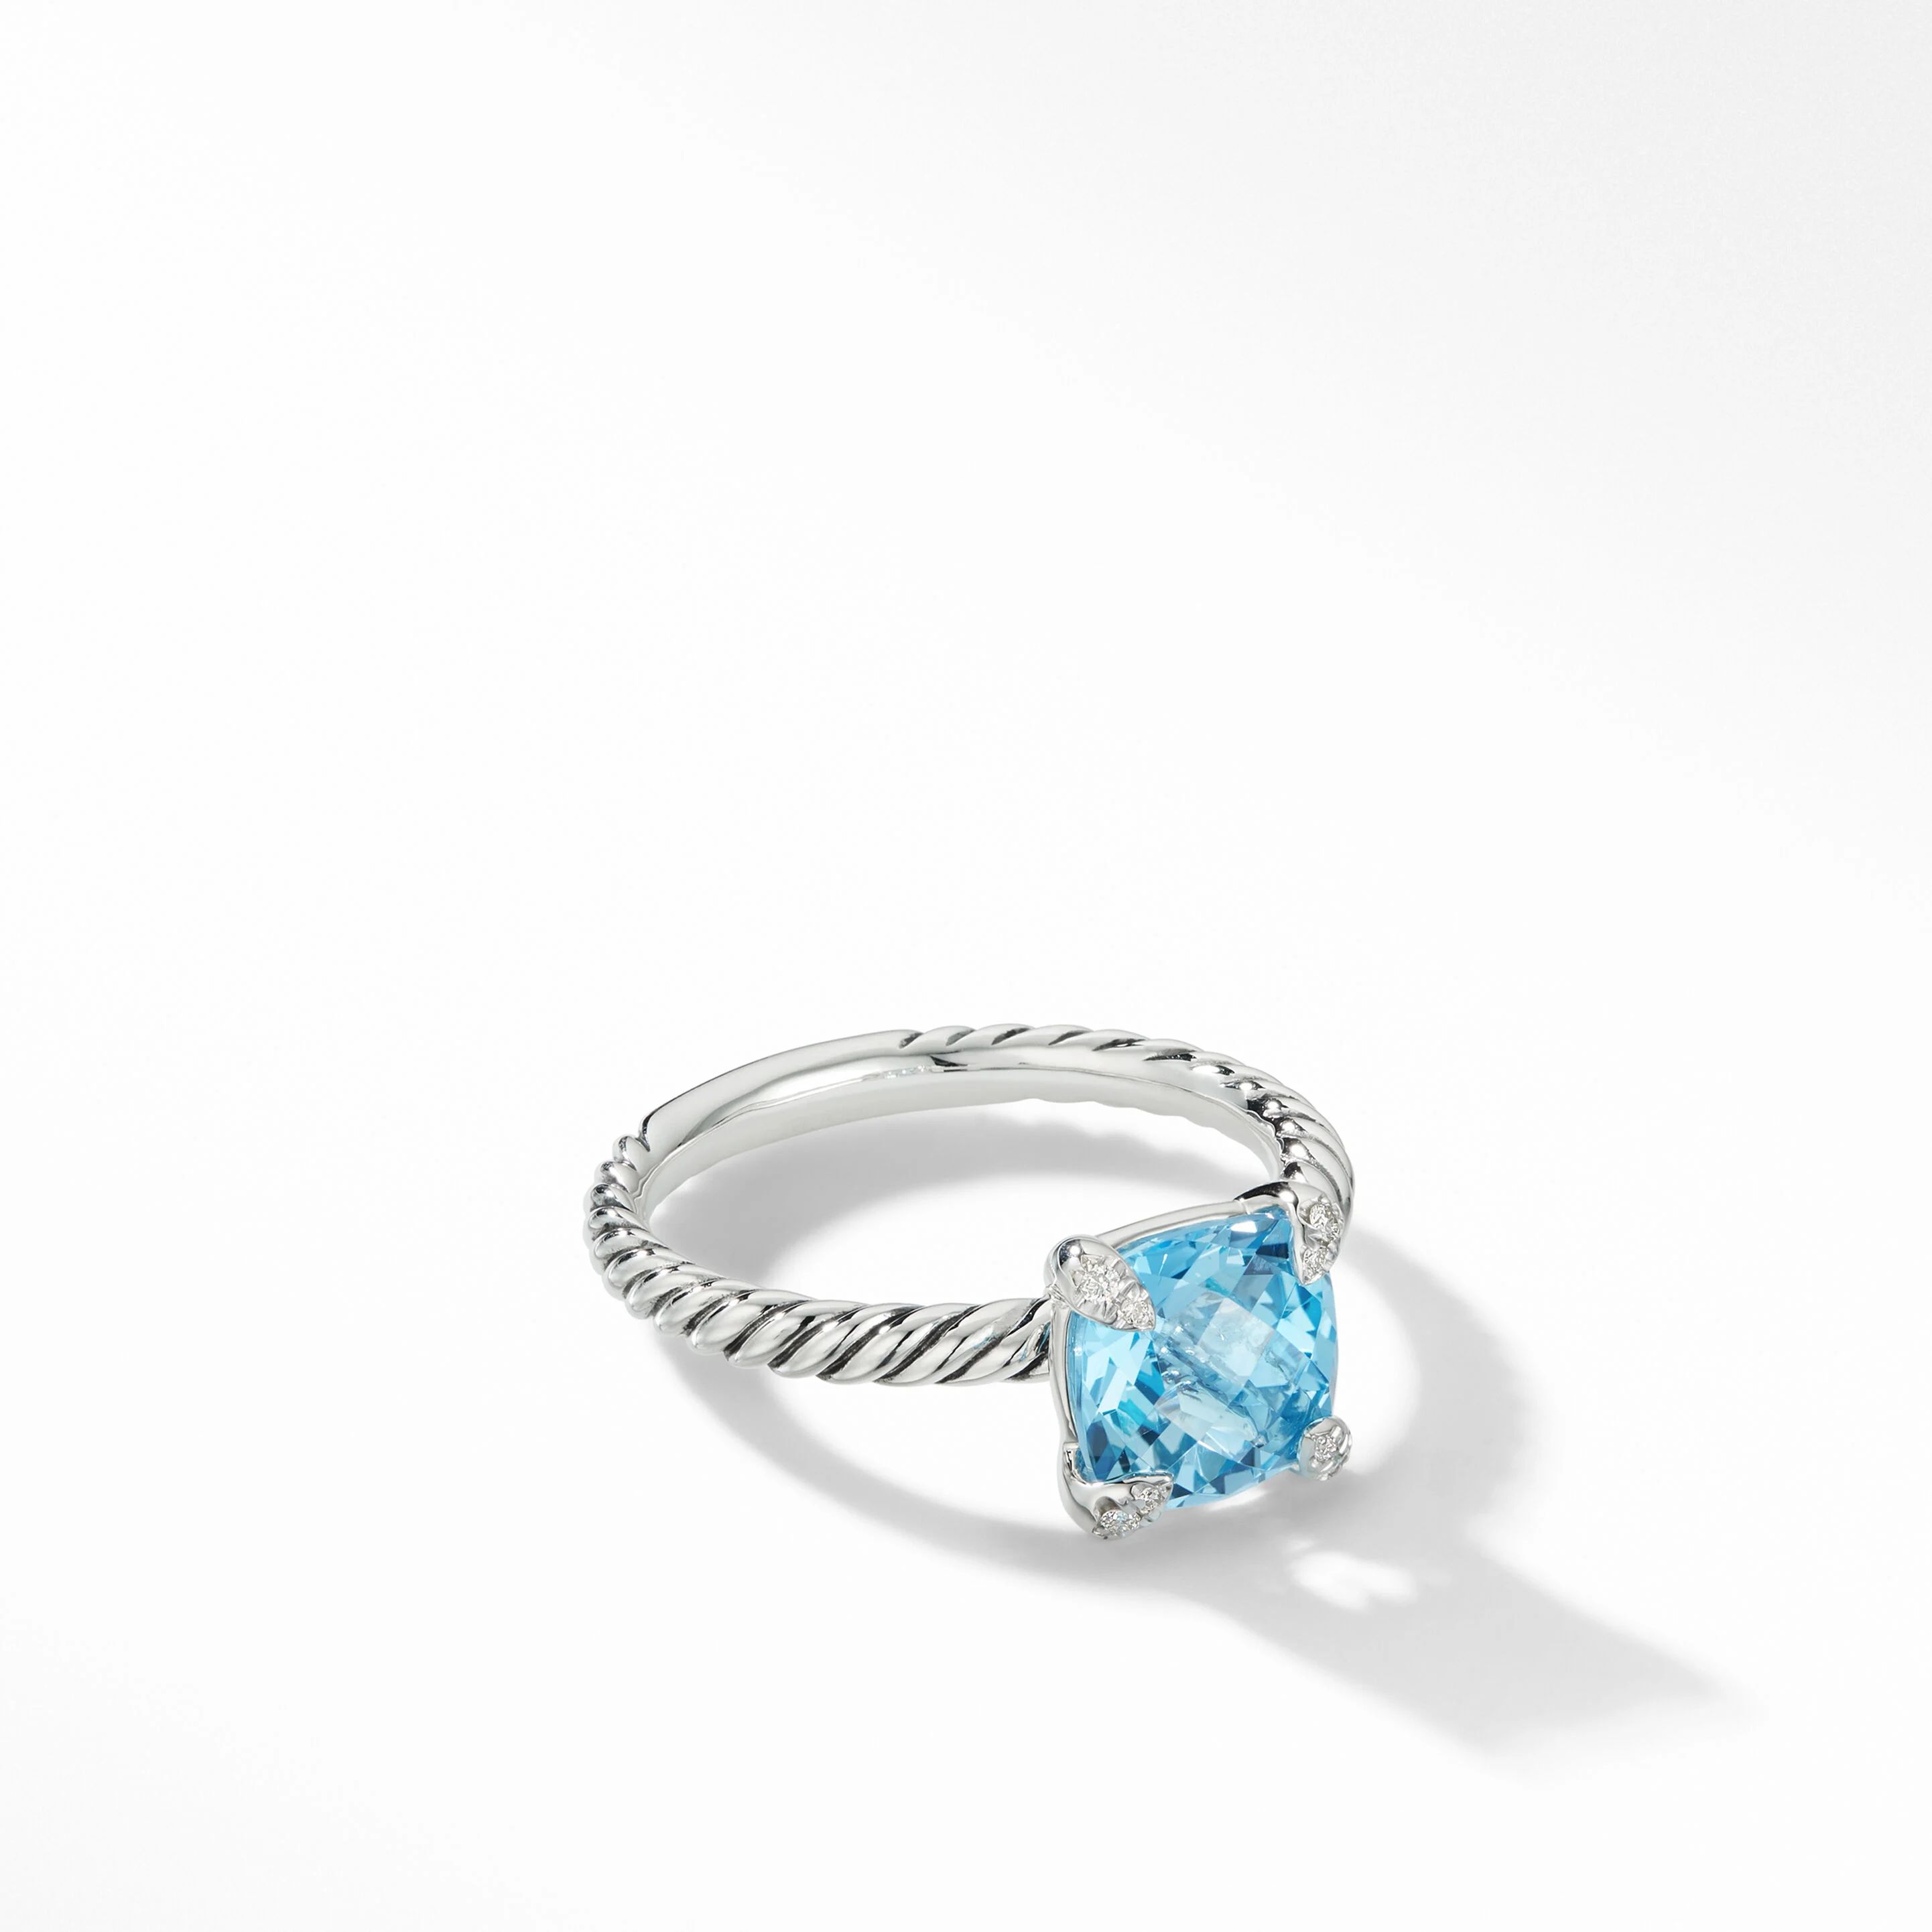 Chatelaine® Ring in Sterling Silver with Blue Topaz and Pavé Diamonds | David Yurman